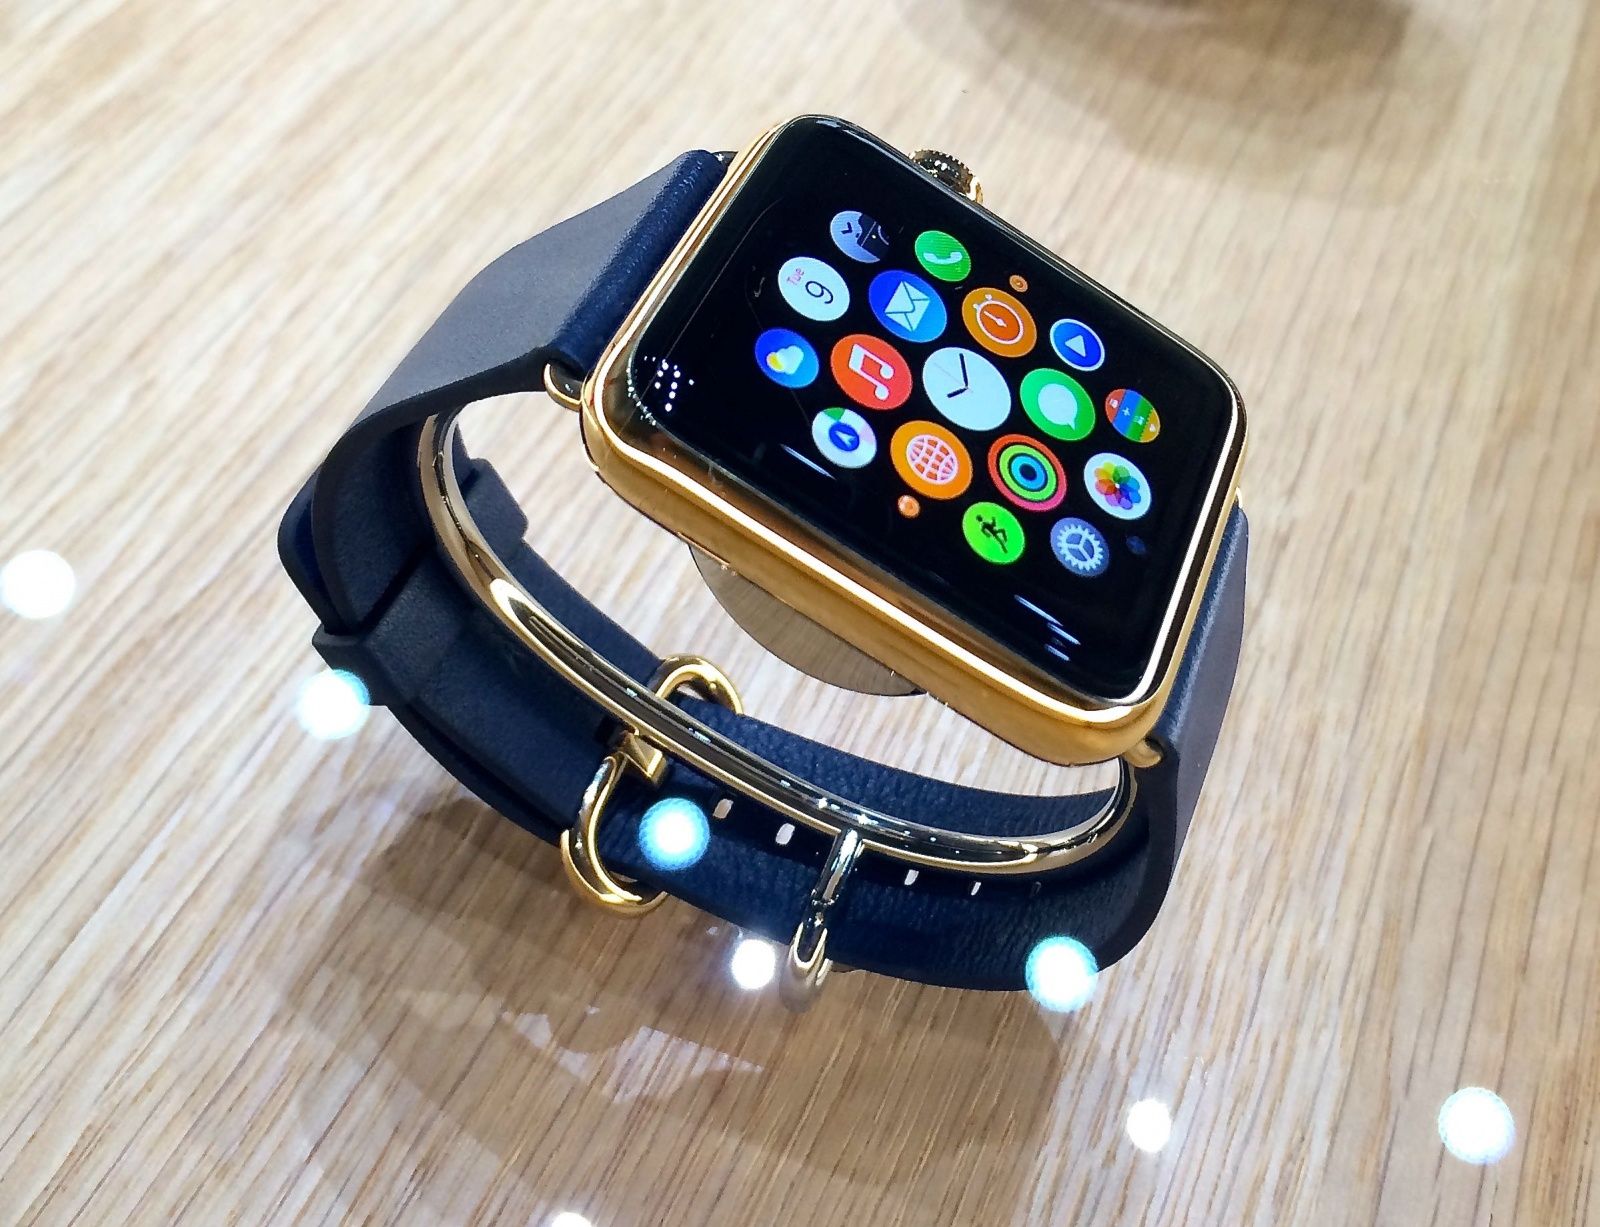 apple watch sales training material leaked 05